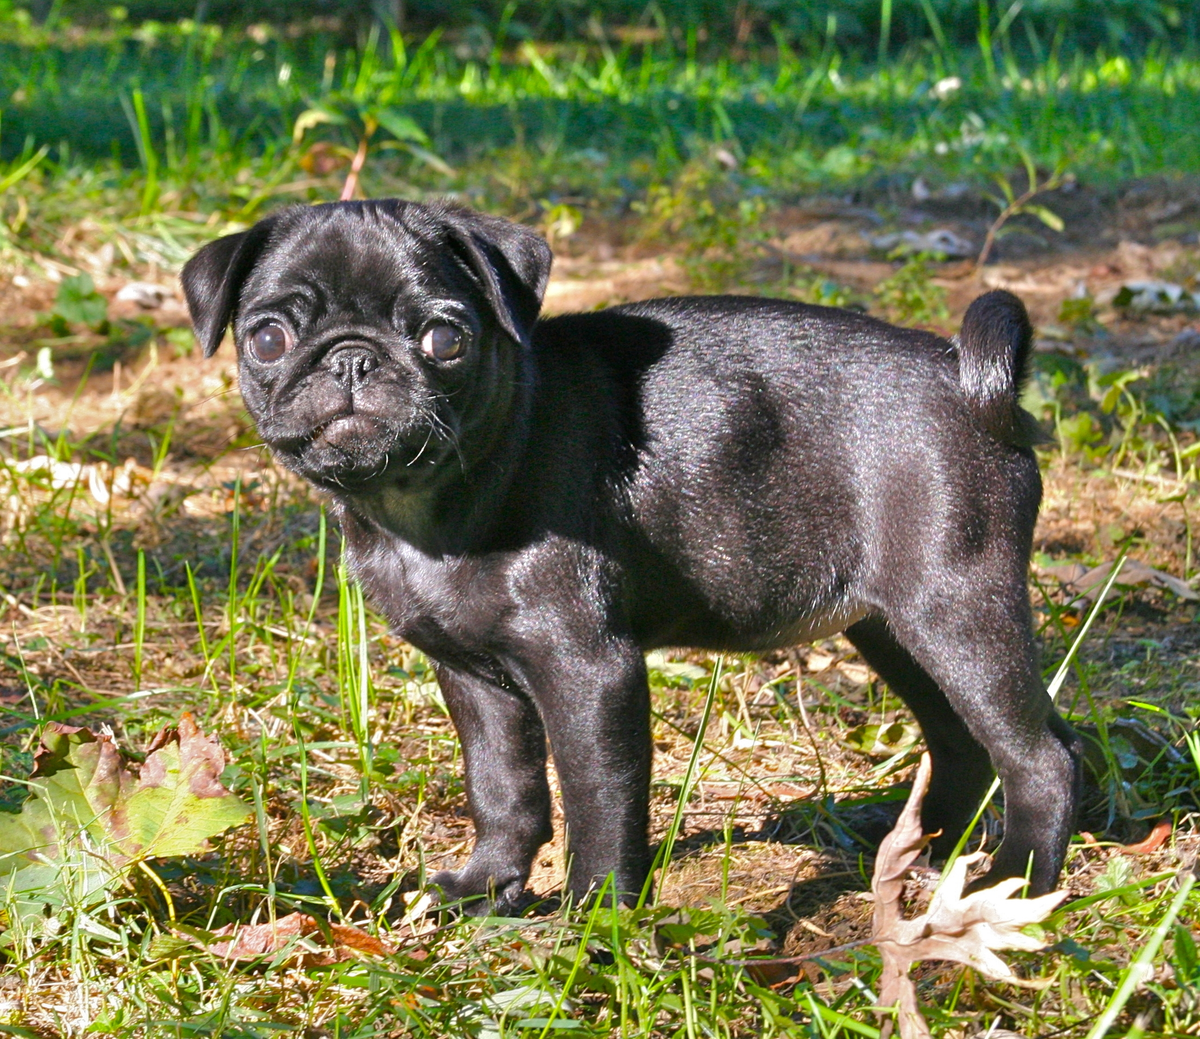 Pug puppies for sale and Black pug puppies for sale